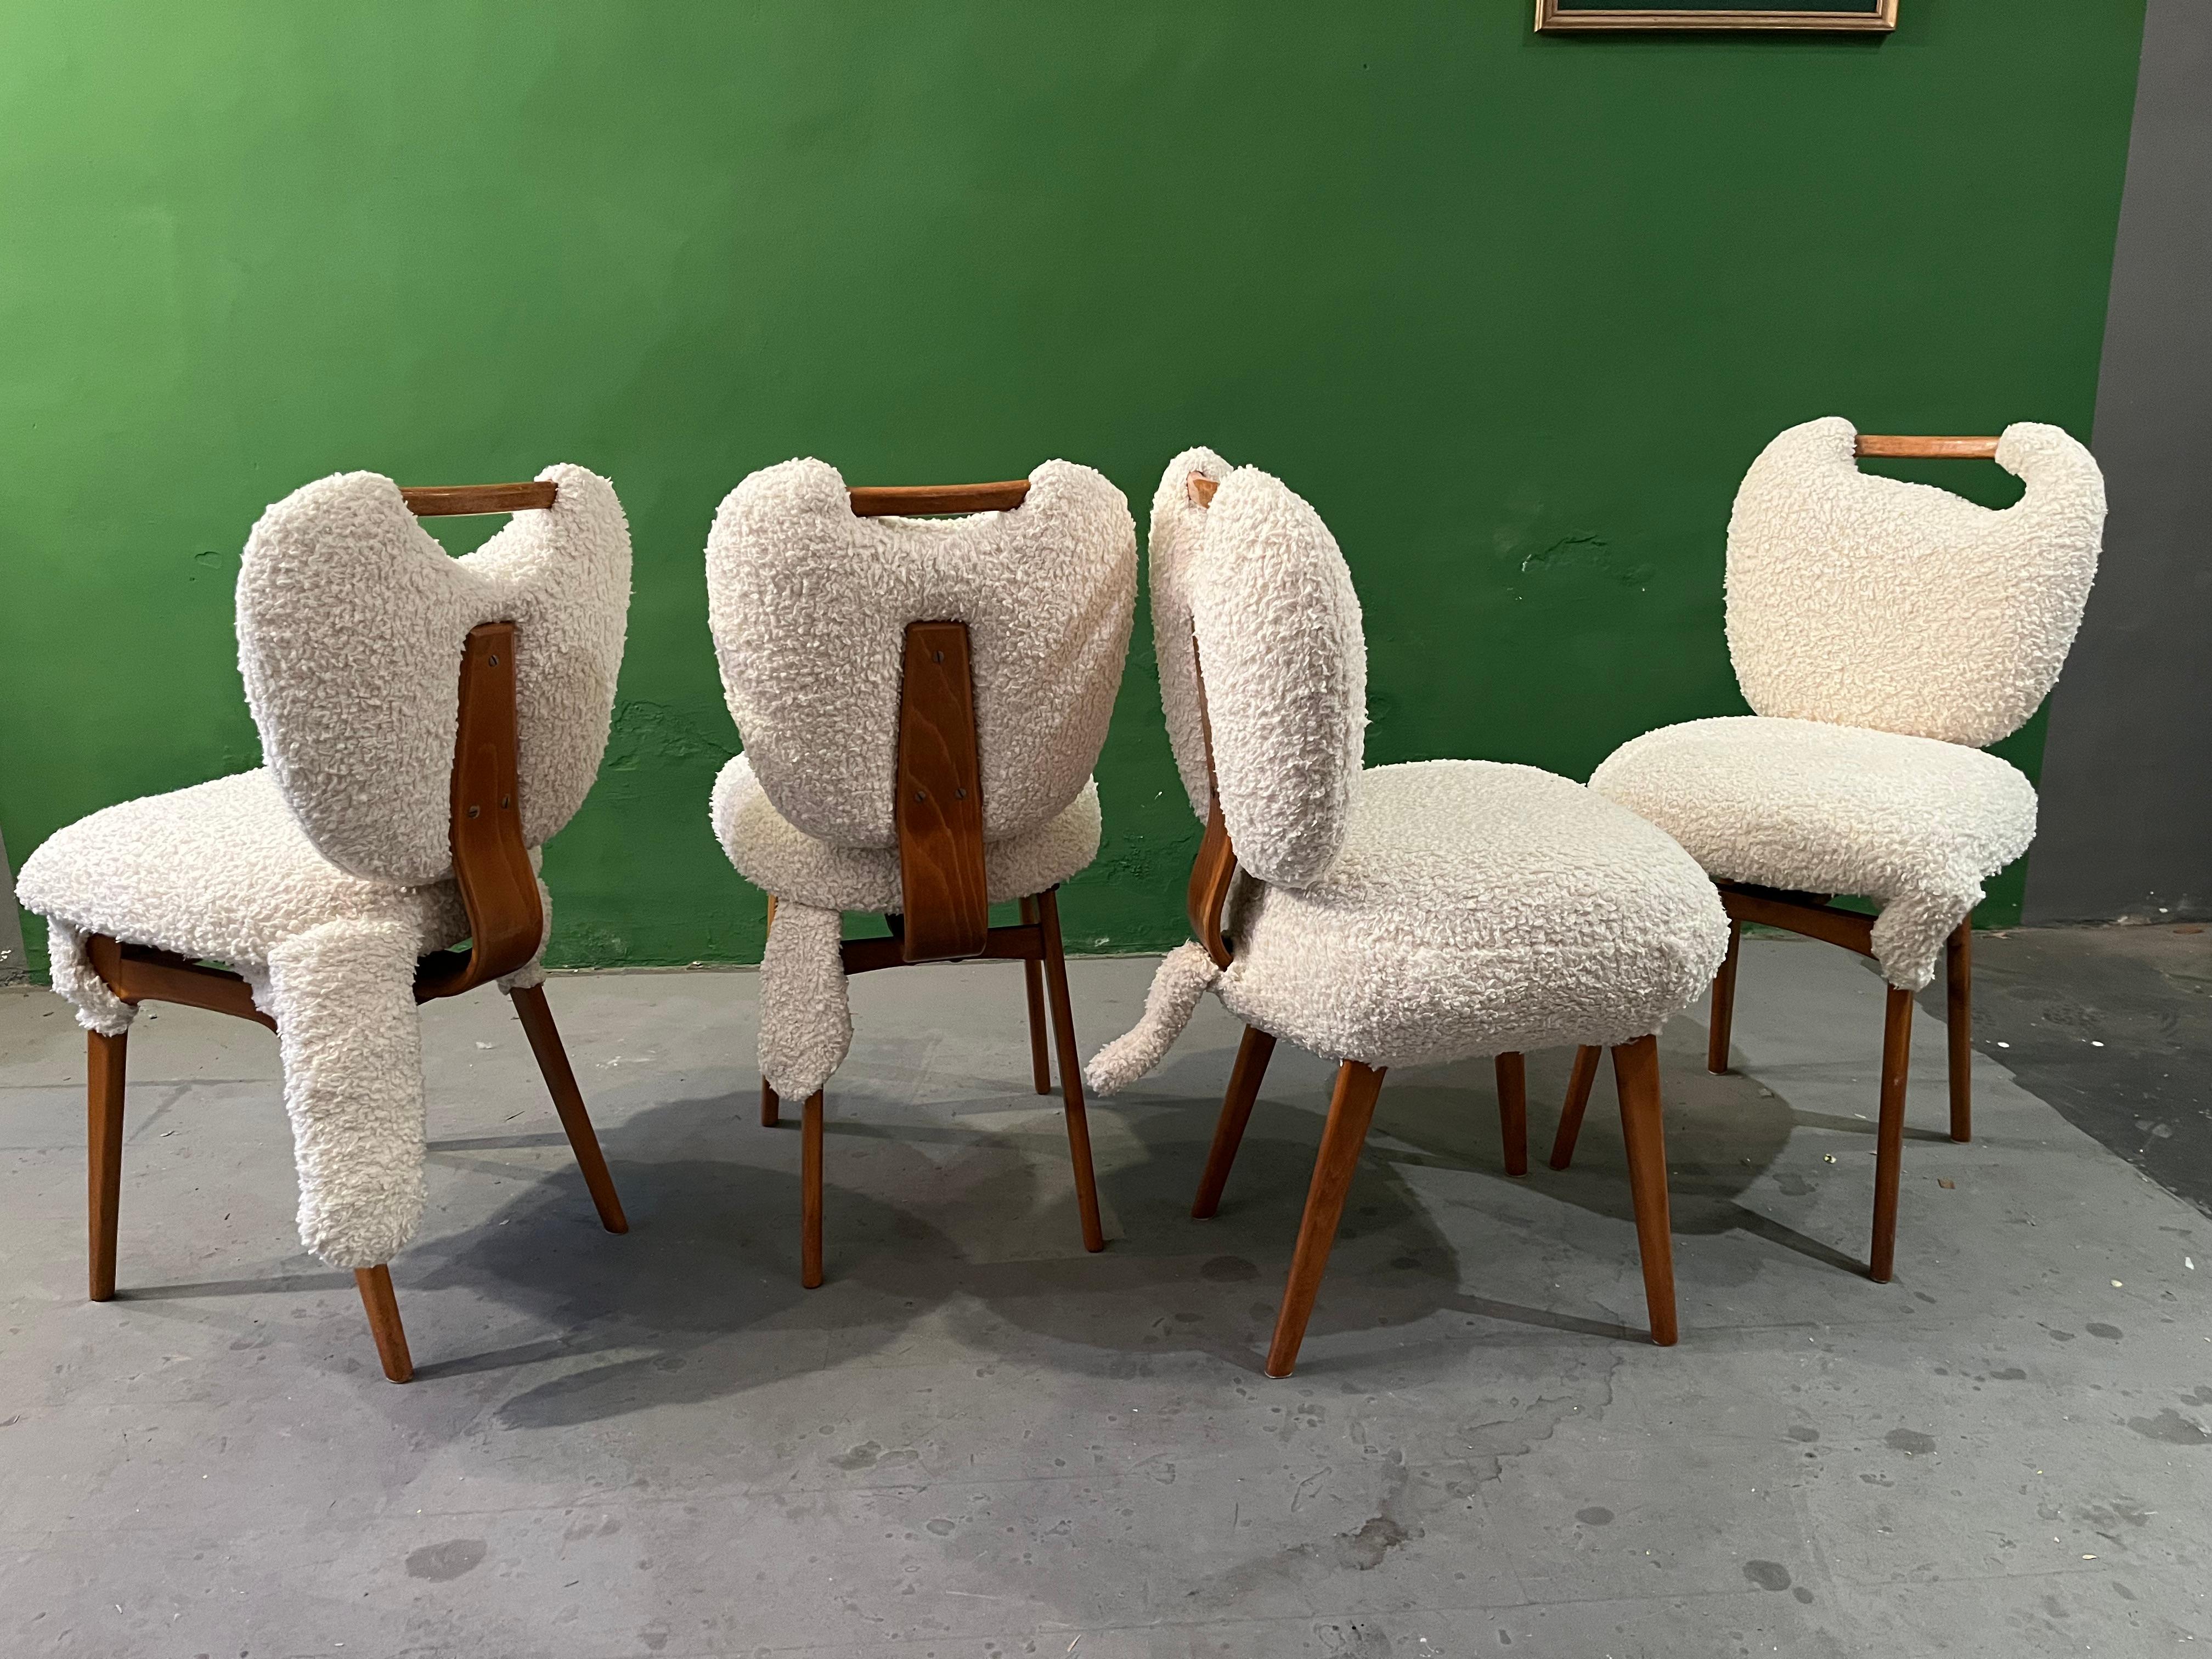 Teddy Chairs by Markus Friedrich Staab/ Contemporized For Sale 10